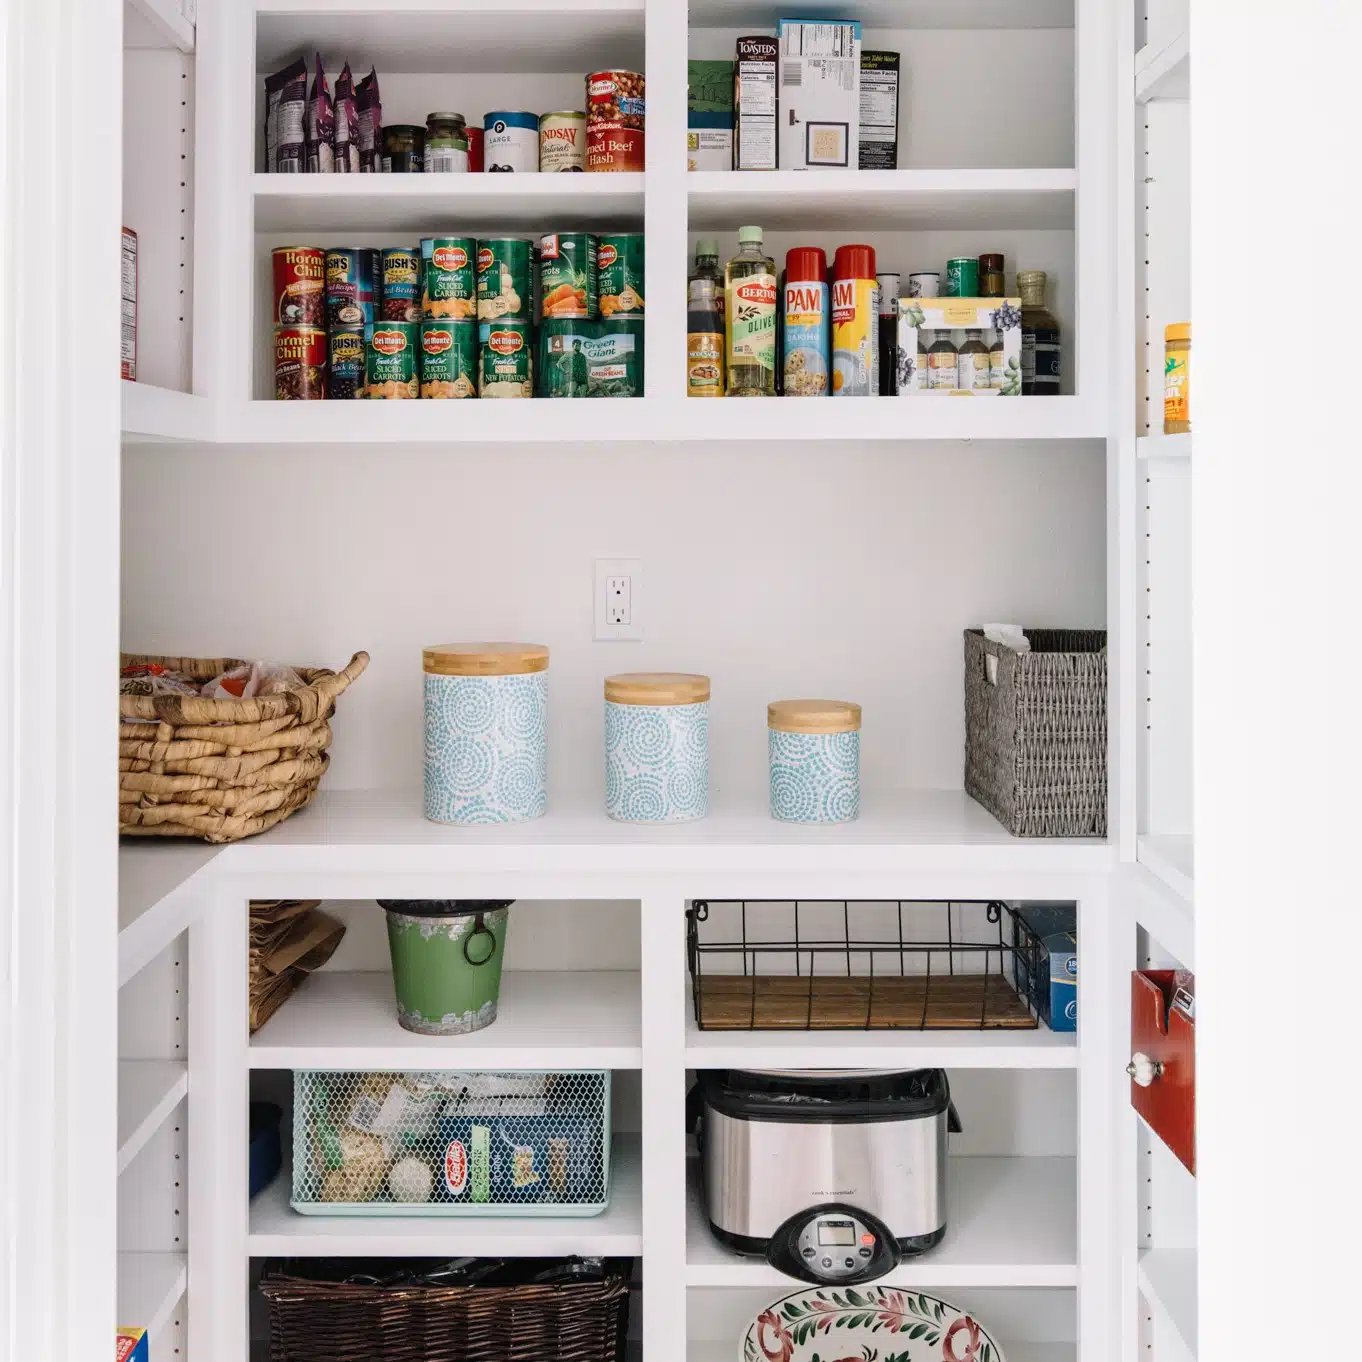 Clean pantry for a healthy home